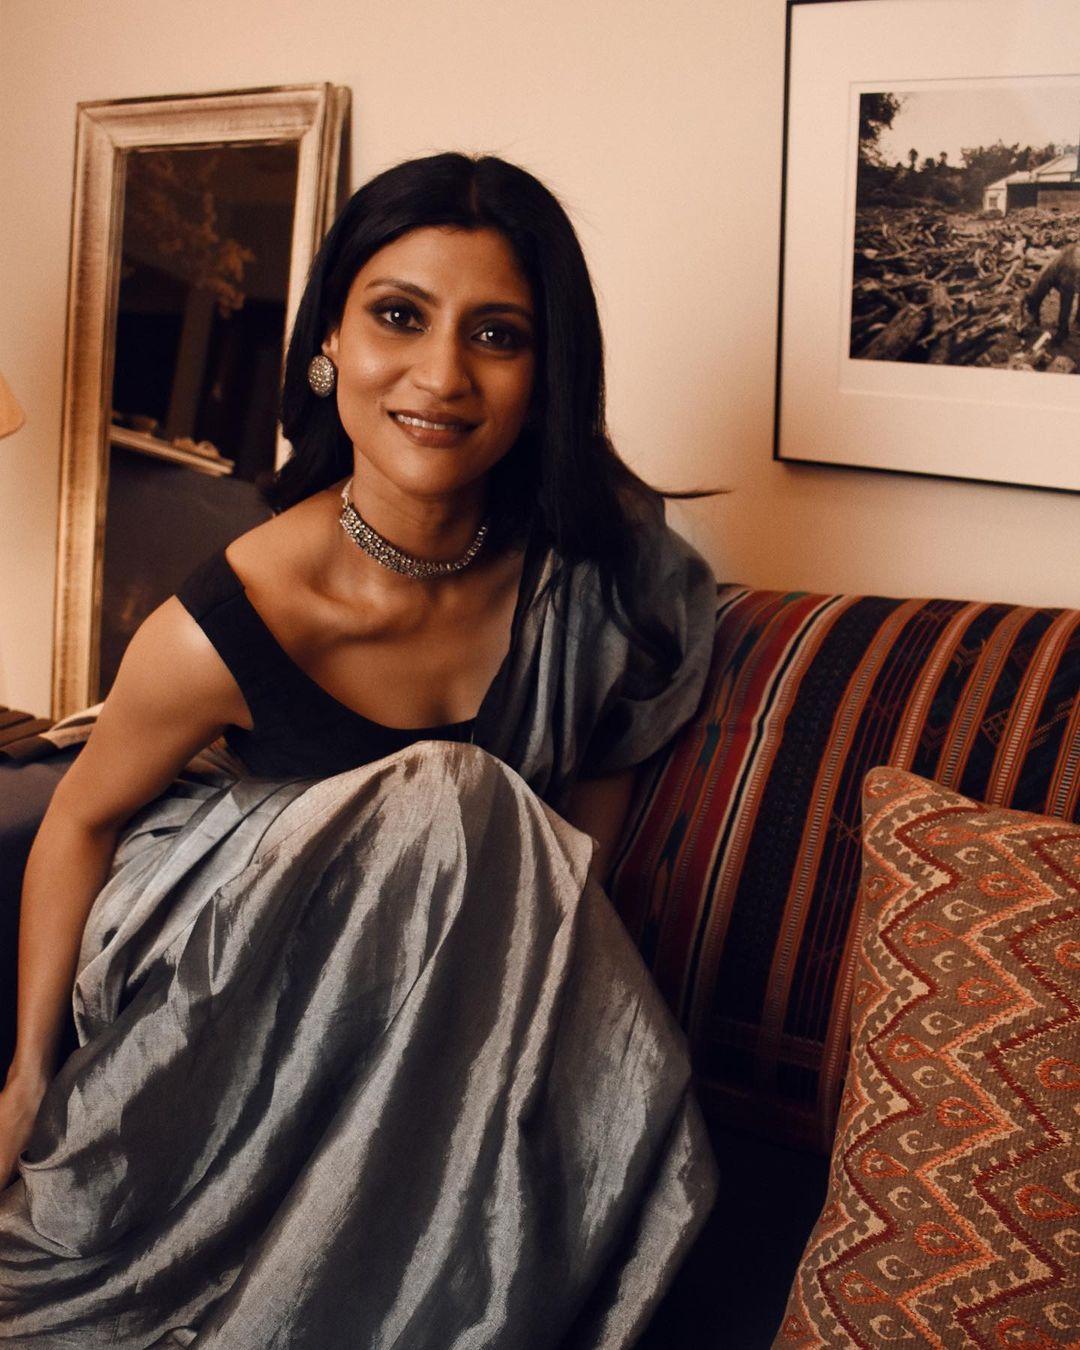 Konkona Sen Sharma recently shared some stunning pictures on her social media, rocking a gorgeous metallic grey saree paired with a sleek black sleeveless blouse.